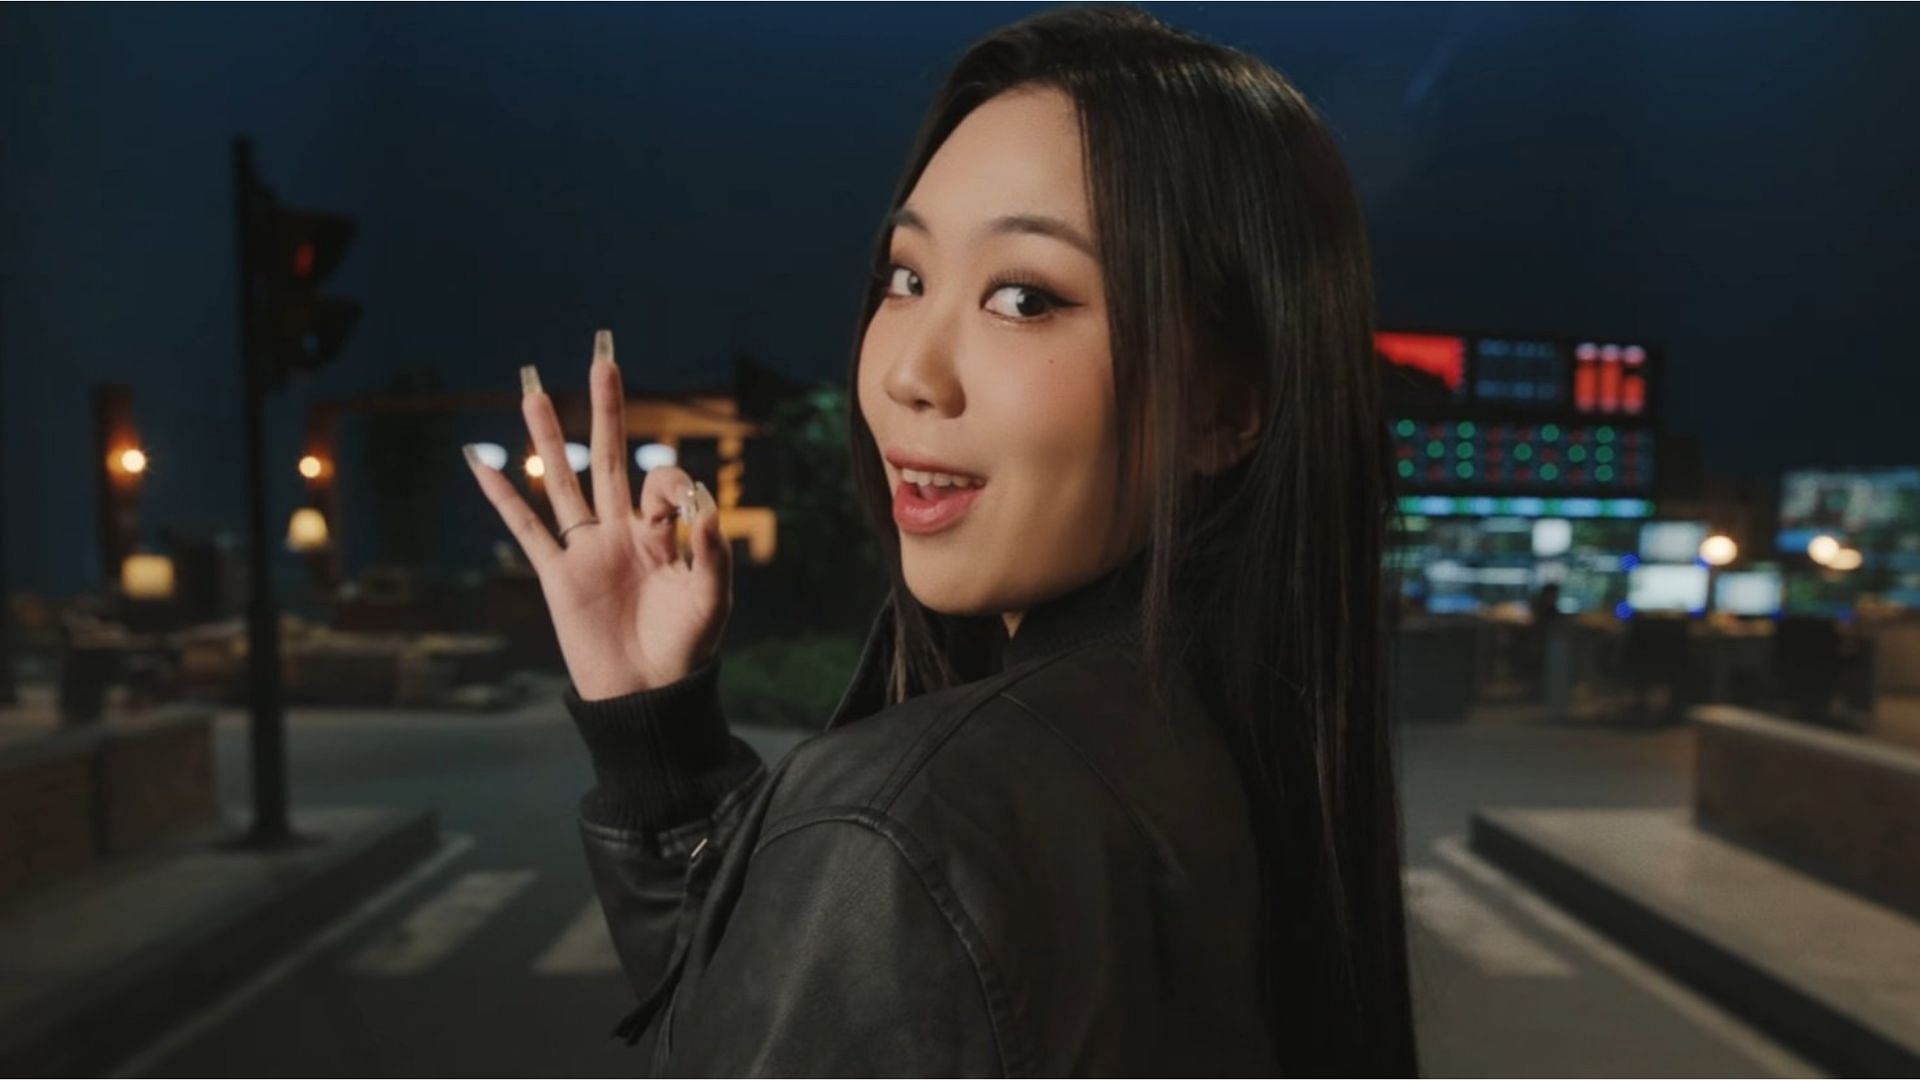 Korean rapper Lee Young-ji with her back to the camera, turns and smirks in the music video for BSS